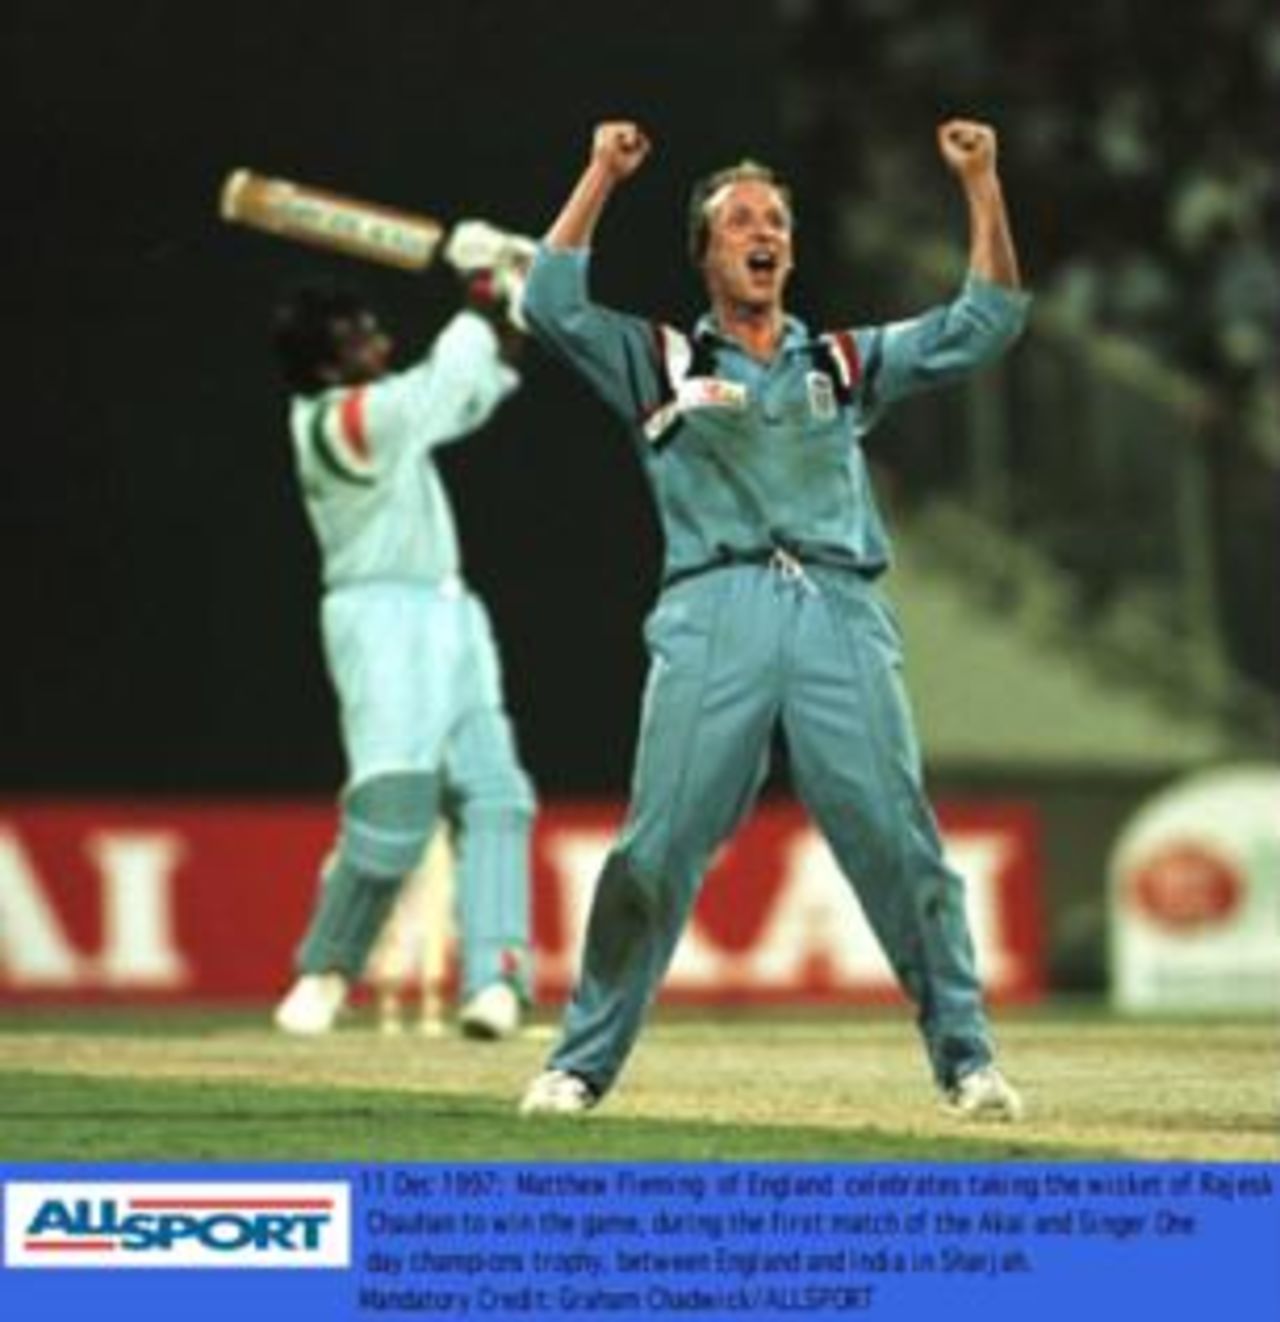 Champion's Trophy, December 1997. England v India, 11 Dec 1997: Fleming celebrates as Chauhan is bowled to end the game in the final over. England win by 7 runs.